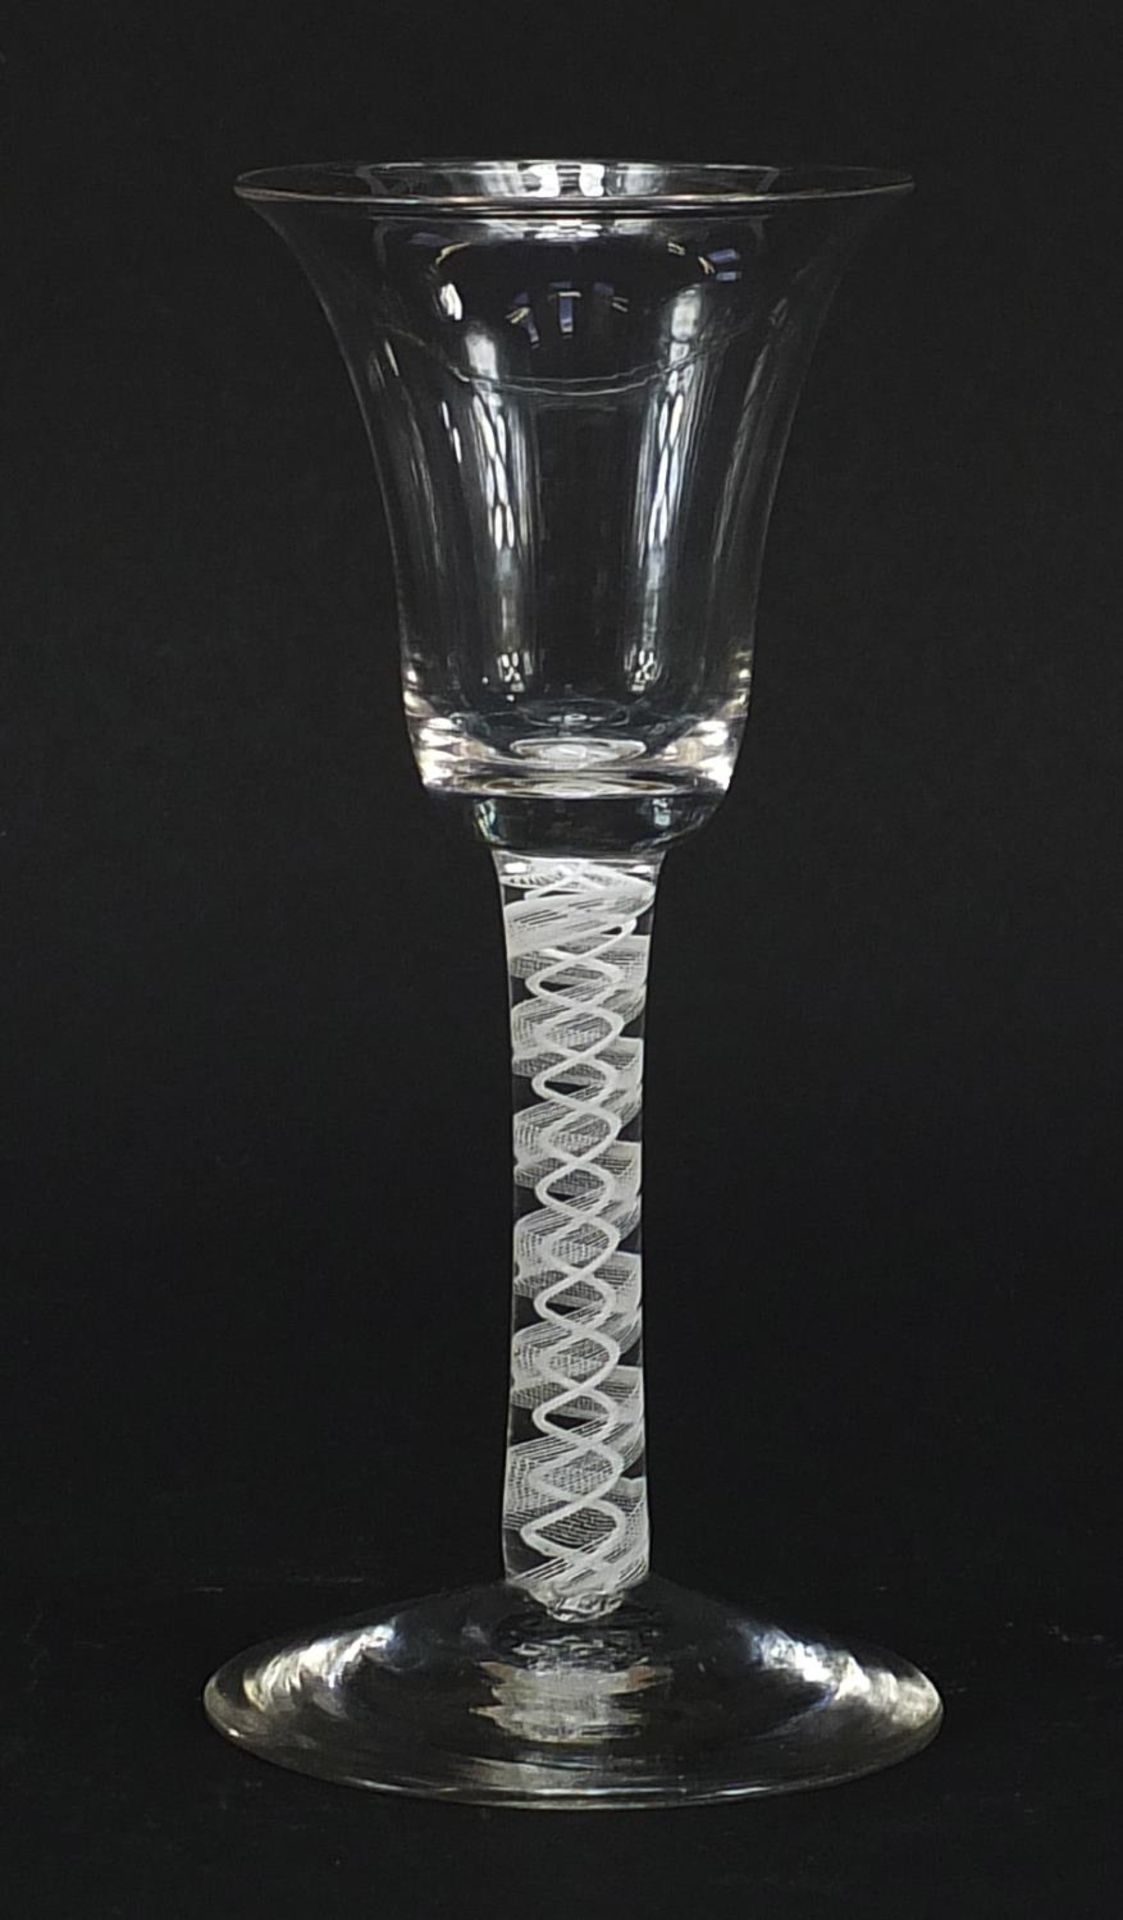 18th century wine glass with bell shaped bowl and multiple opaque twist stem, 16cm high